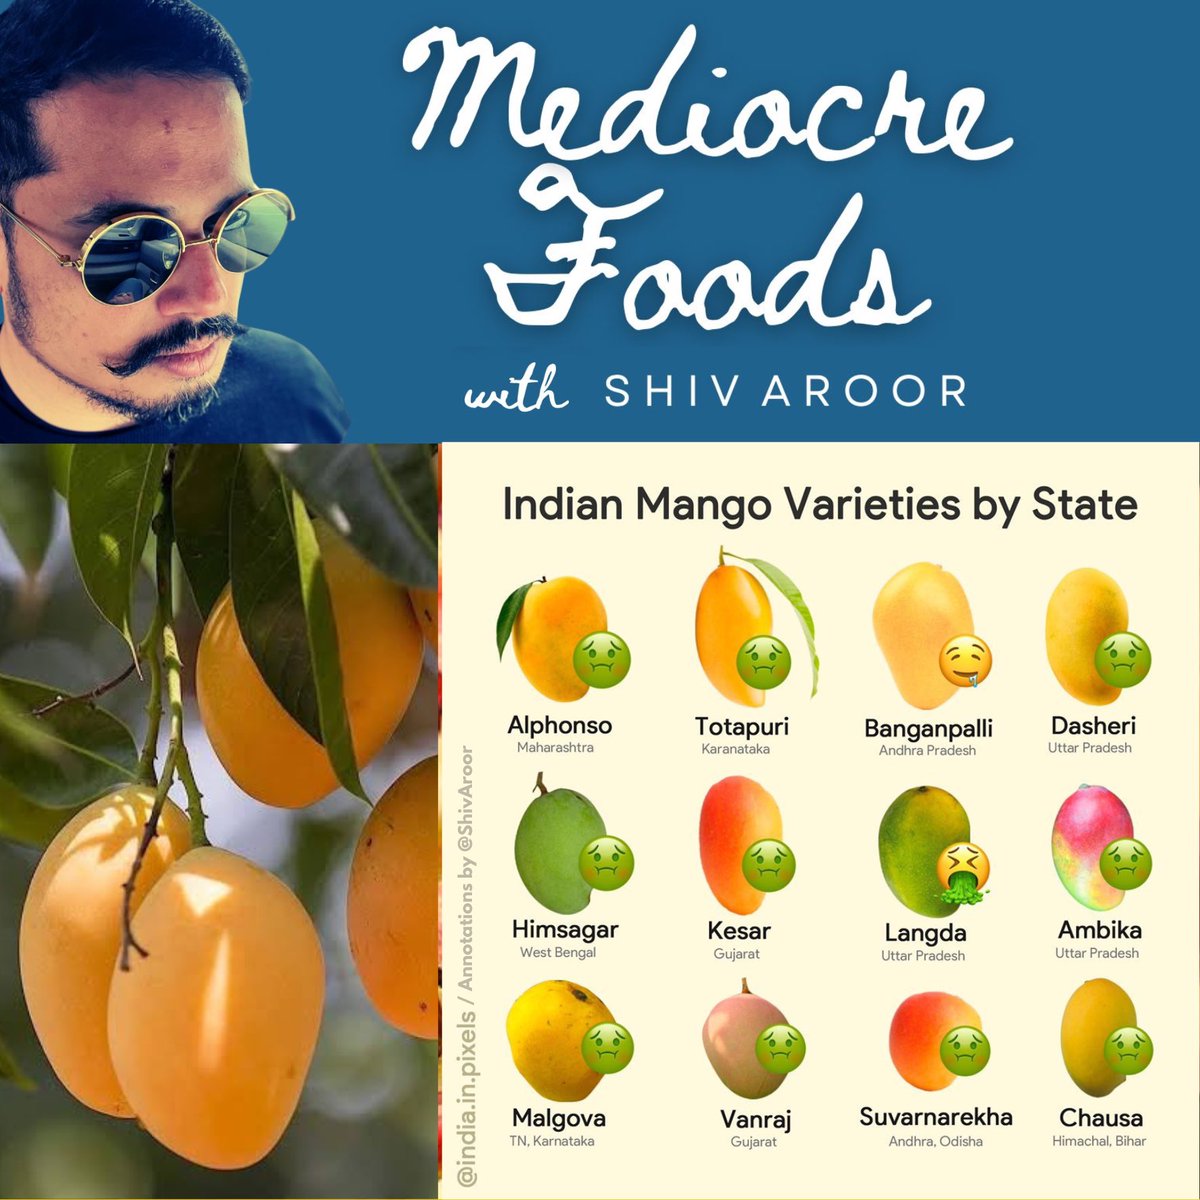 Annual reminder that it’s the season of India’s most overrated fruit: ALL mango varieties except Banganapalli (a.k.a. Safeda, Benishan) #ShivsMediocreFoods 🥭🤢